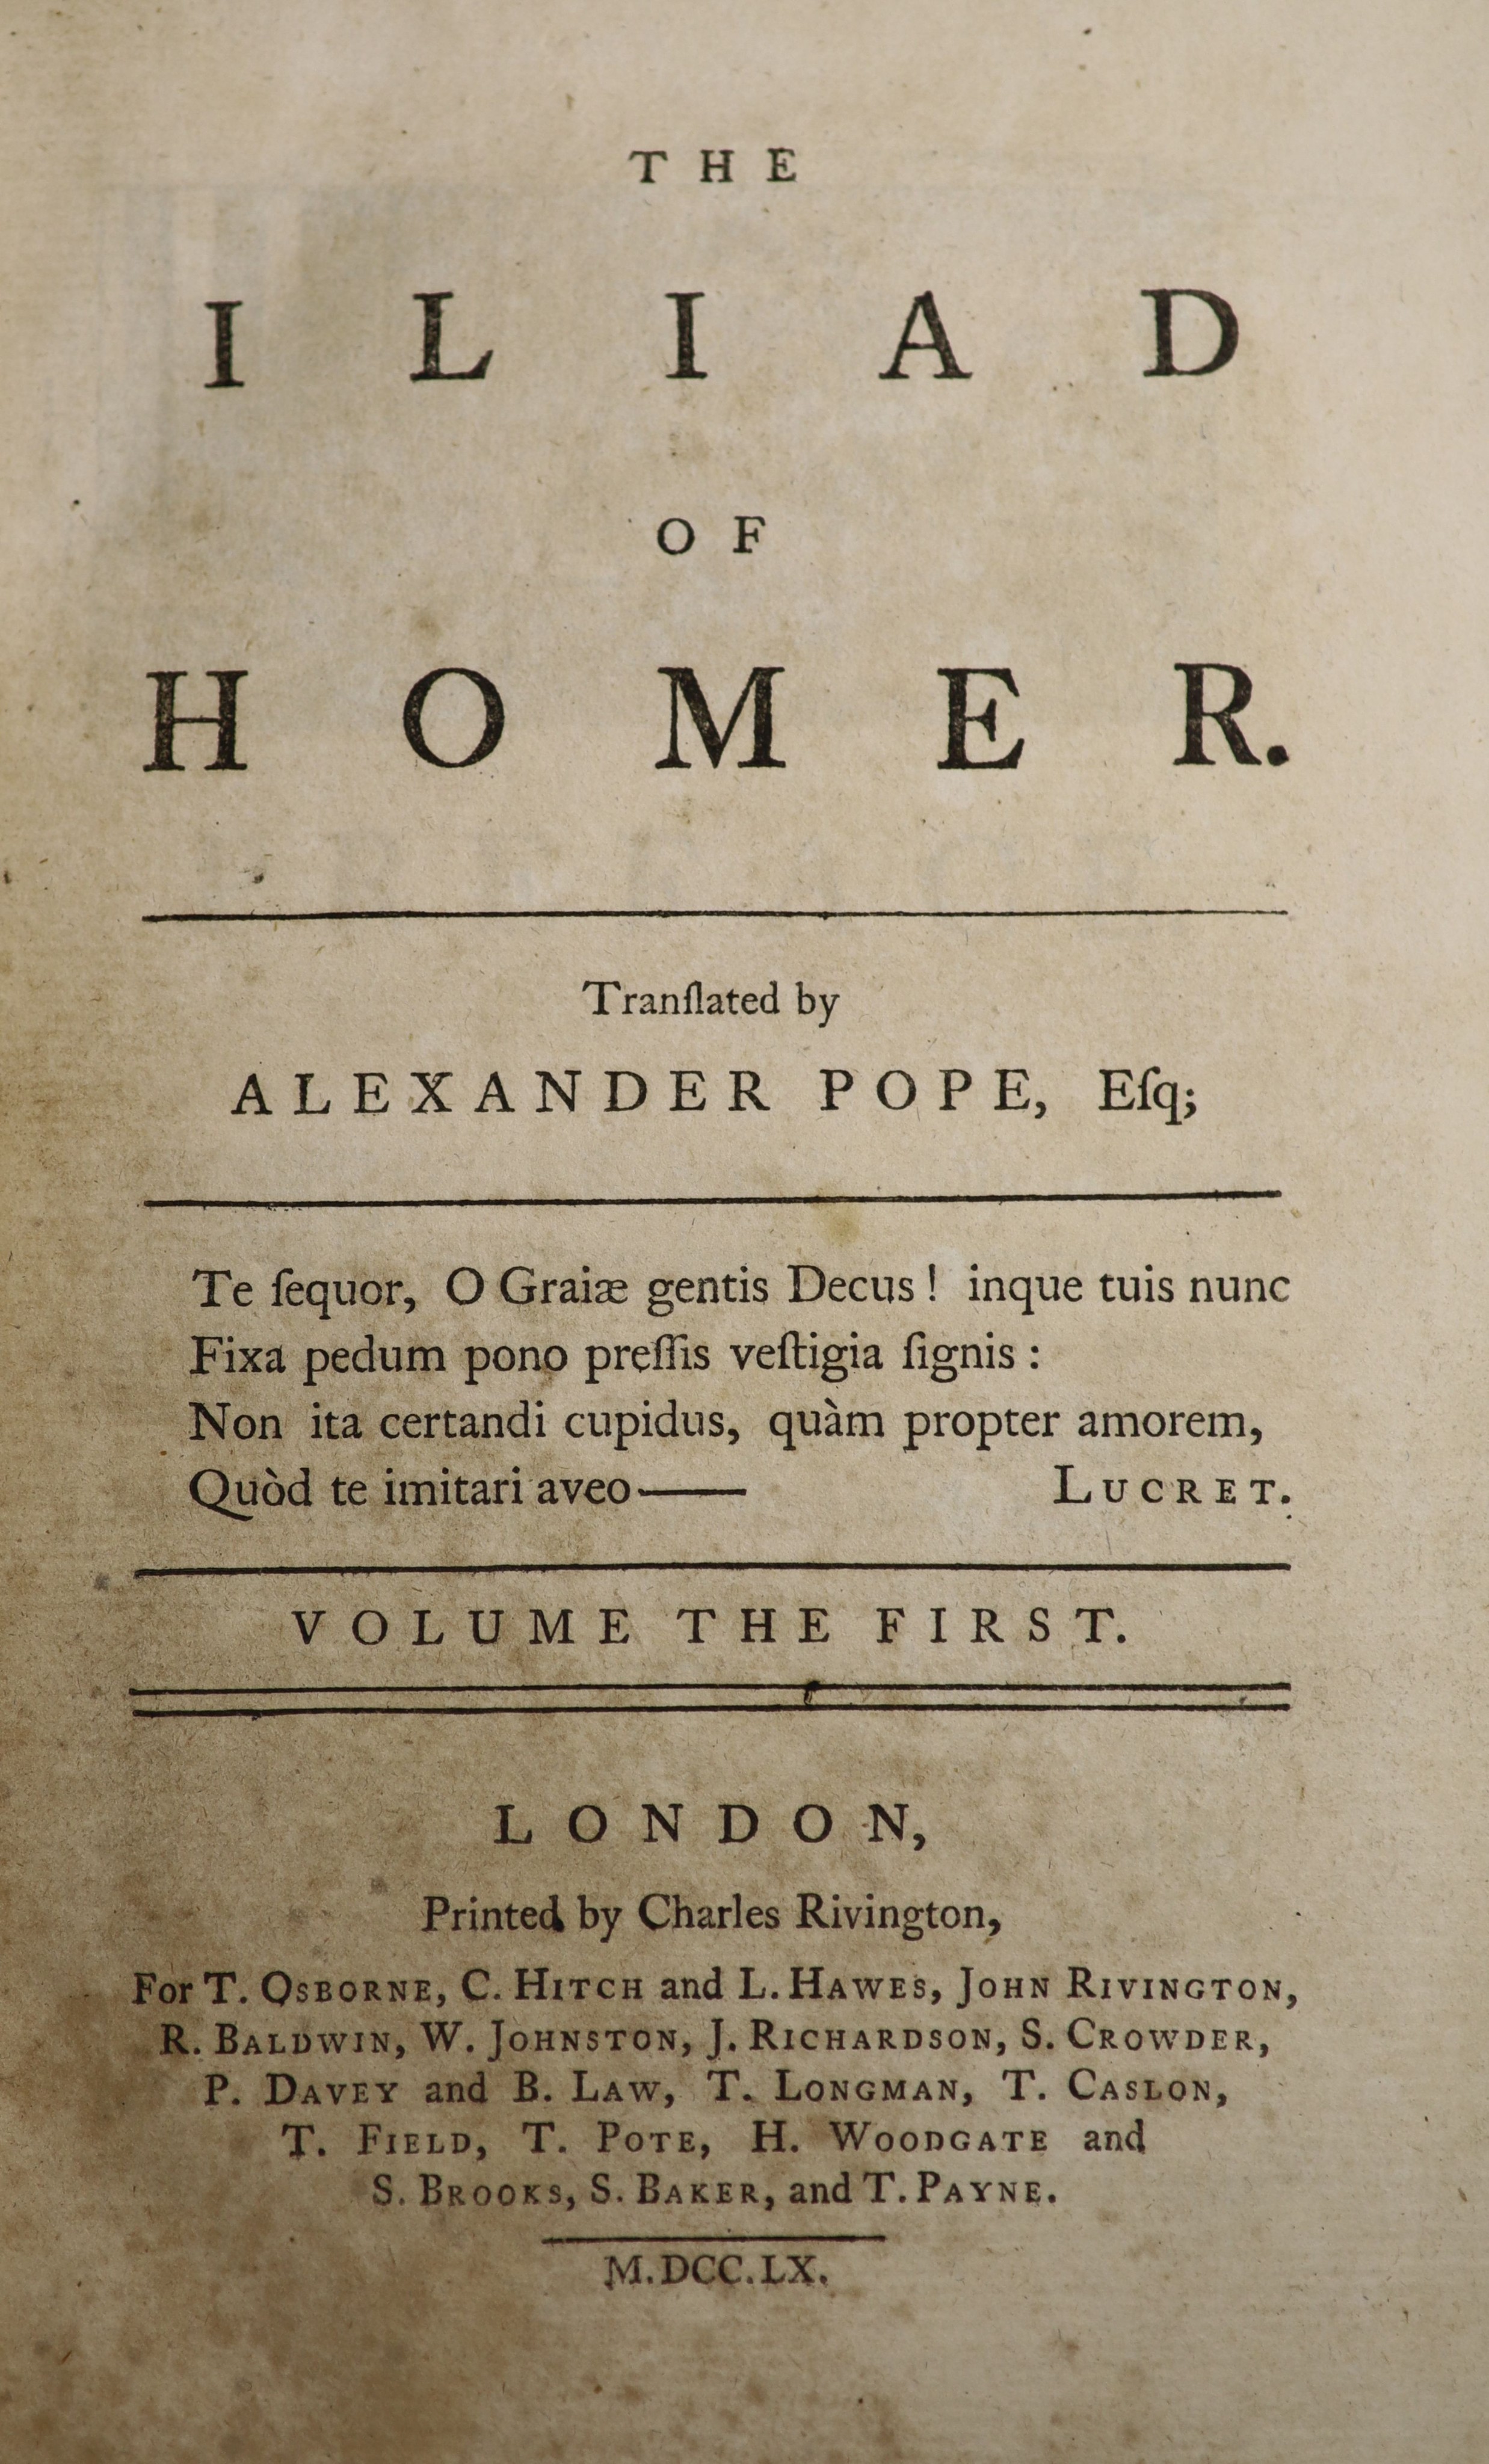 Pope, Alexander - The Iliad of Homer, 6 vols, frontis, folded plate, vignette illus. (within plate marks); contemp. gilt decorated calf, panelled spines with: Wakefield, Gilbert - Observations on Pope, half title and adv